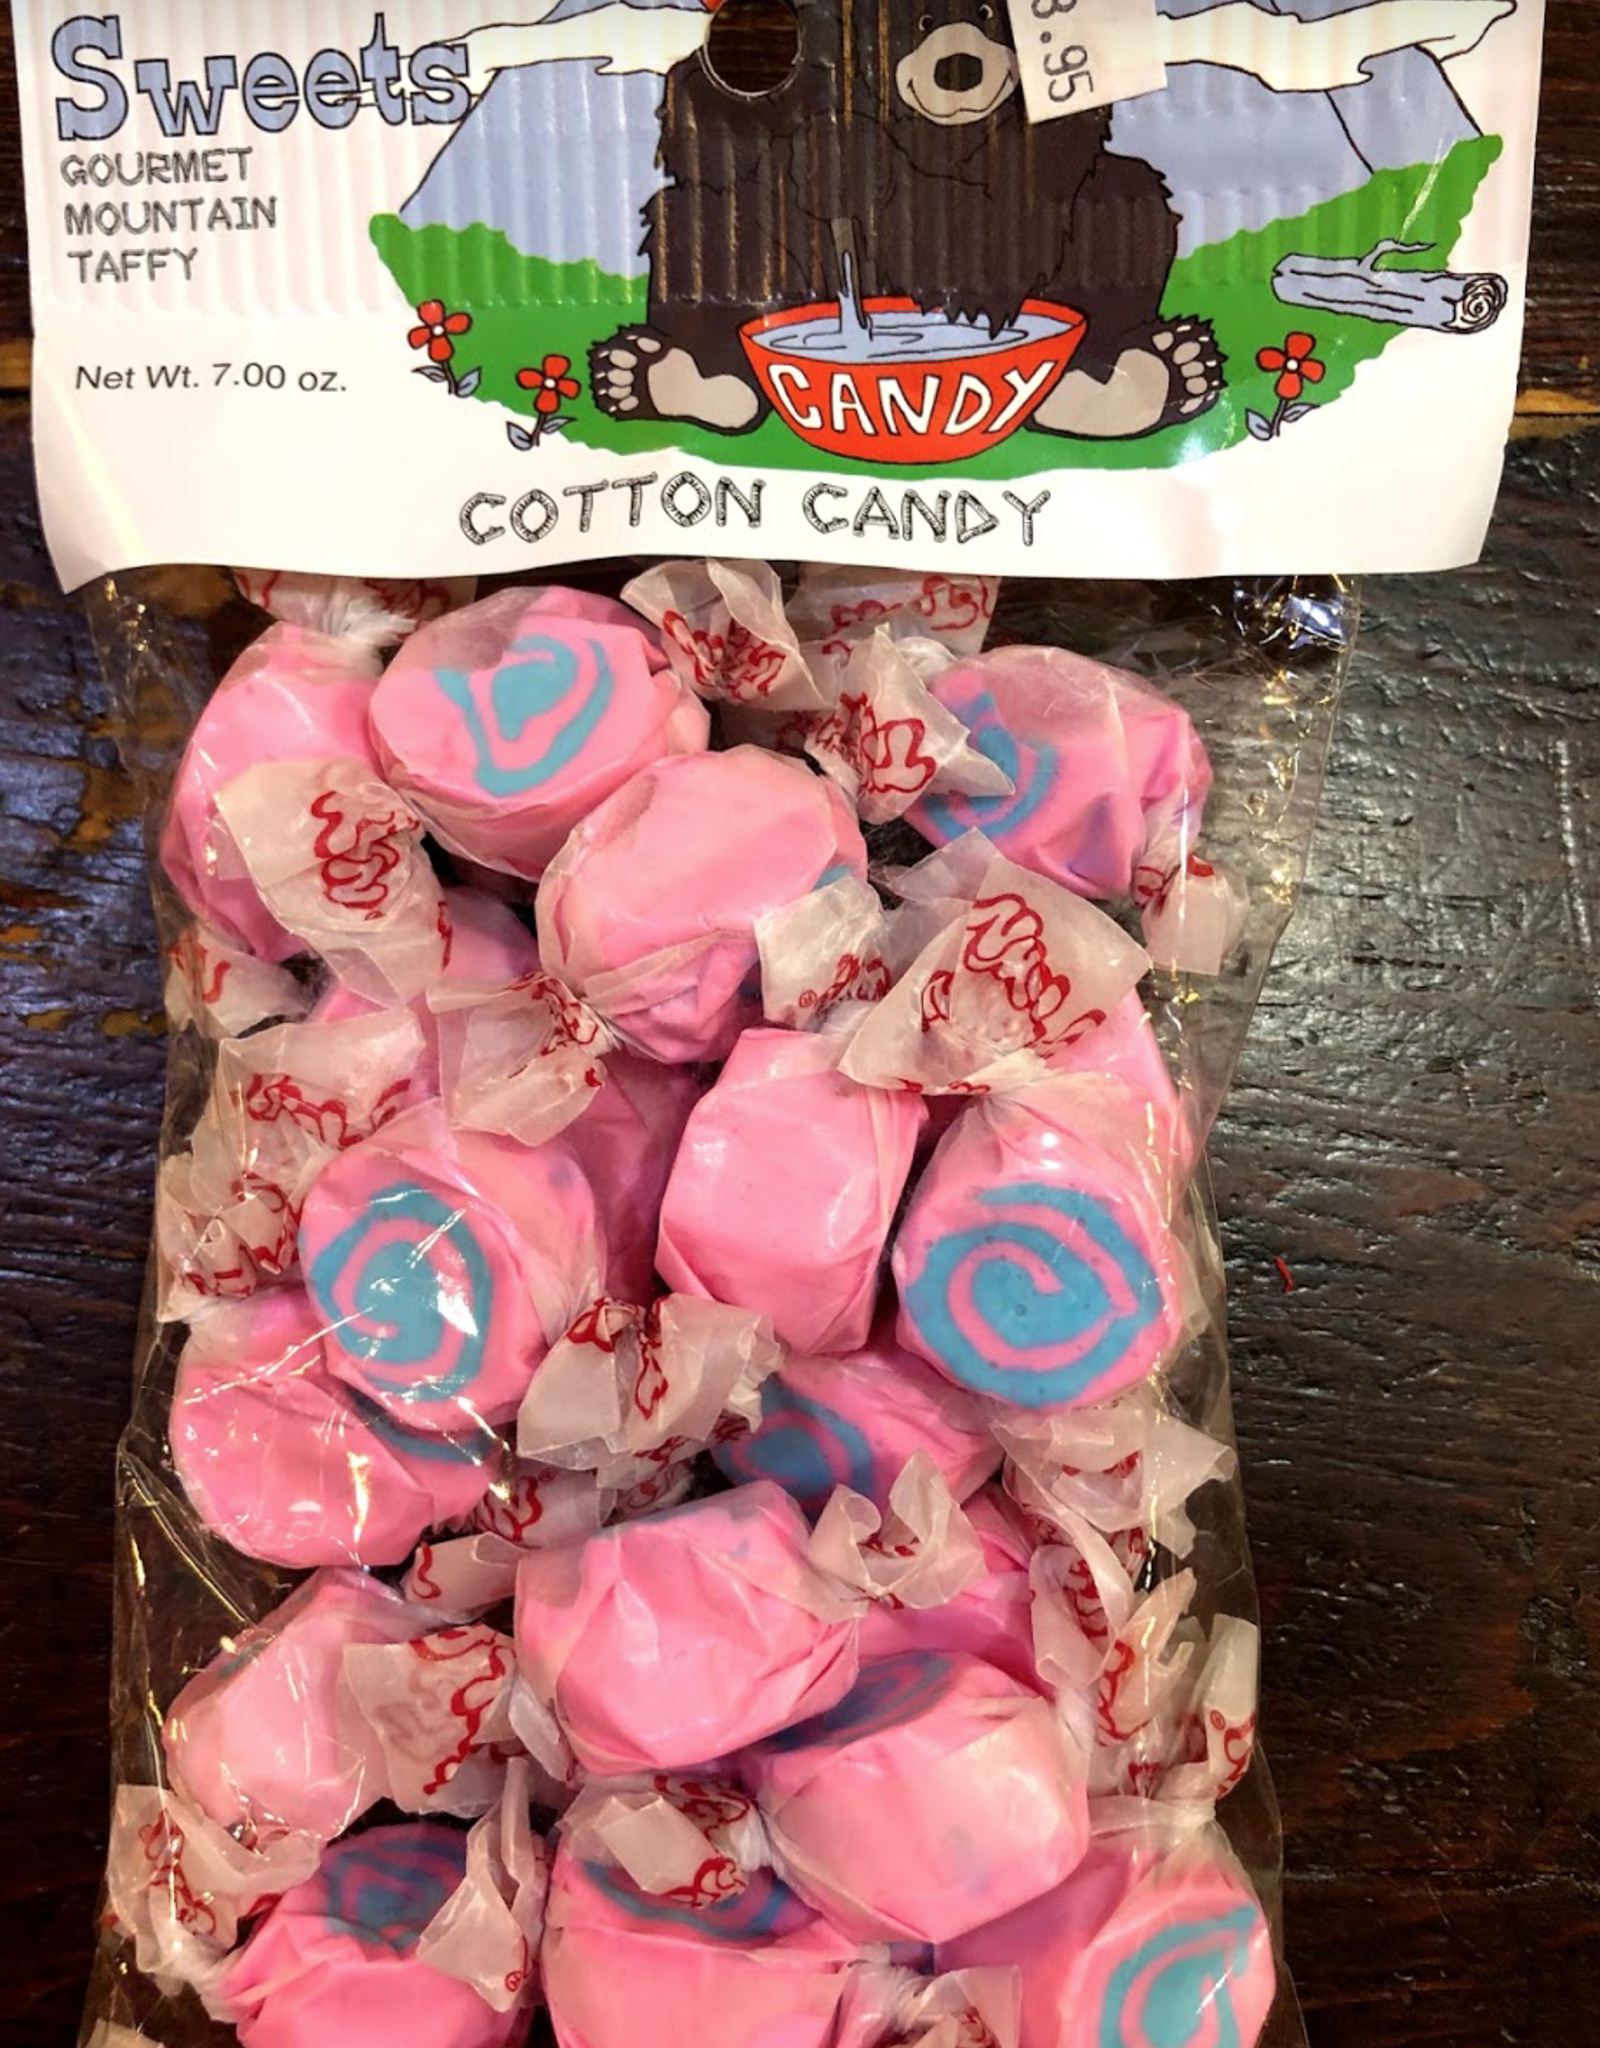 Food & Beverage Mountain Sweets Taffy: Cotton Candy